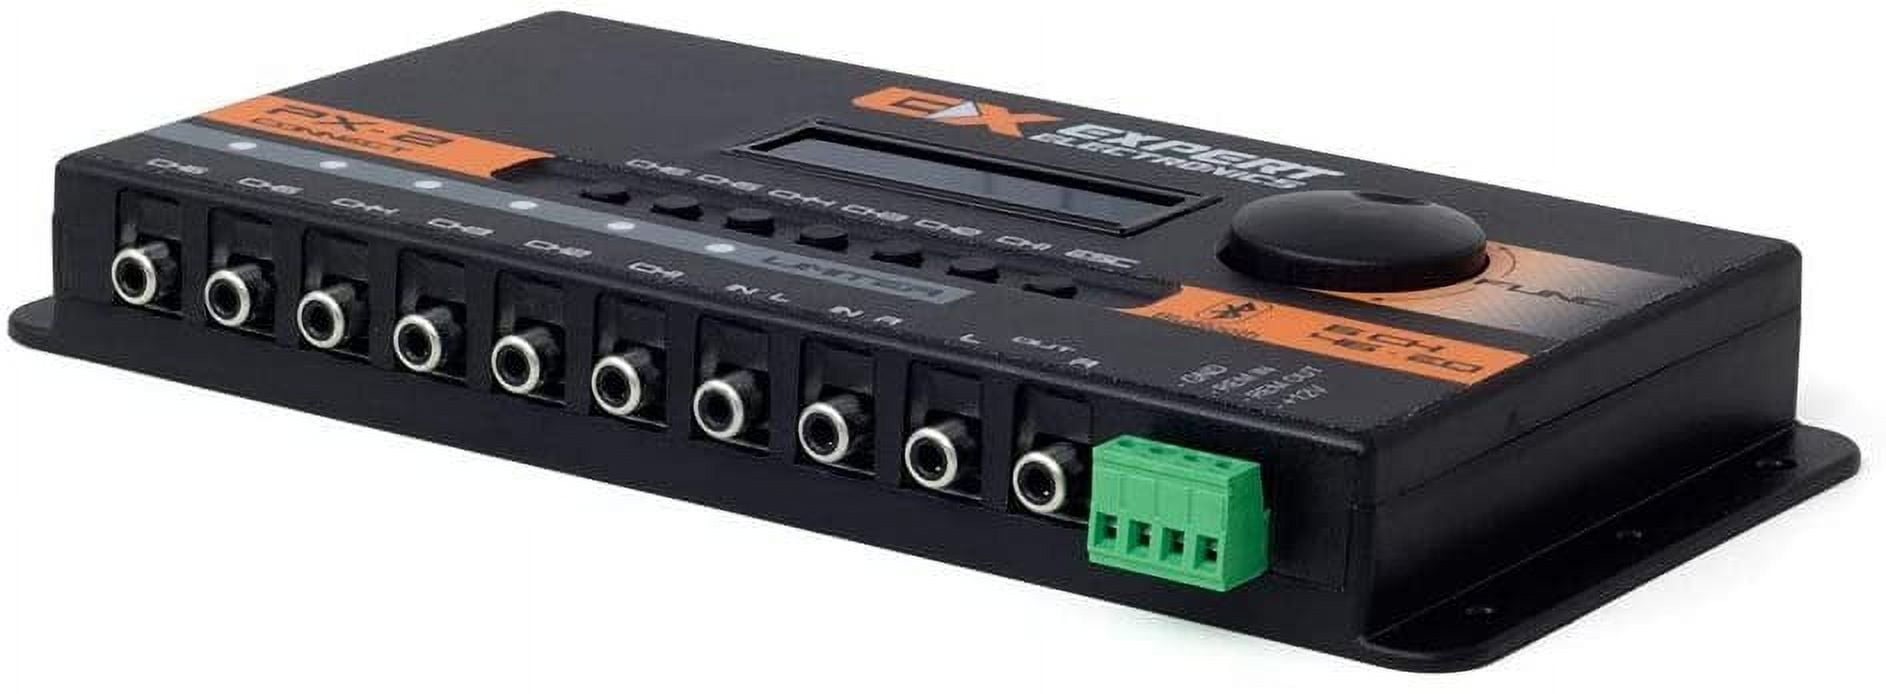 Crossover Expert Eletronics PX2 6 CH Channels Equalizer Digital Audio